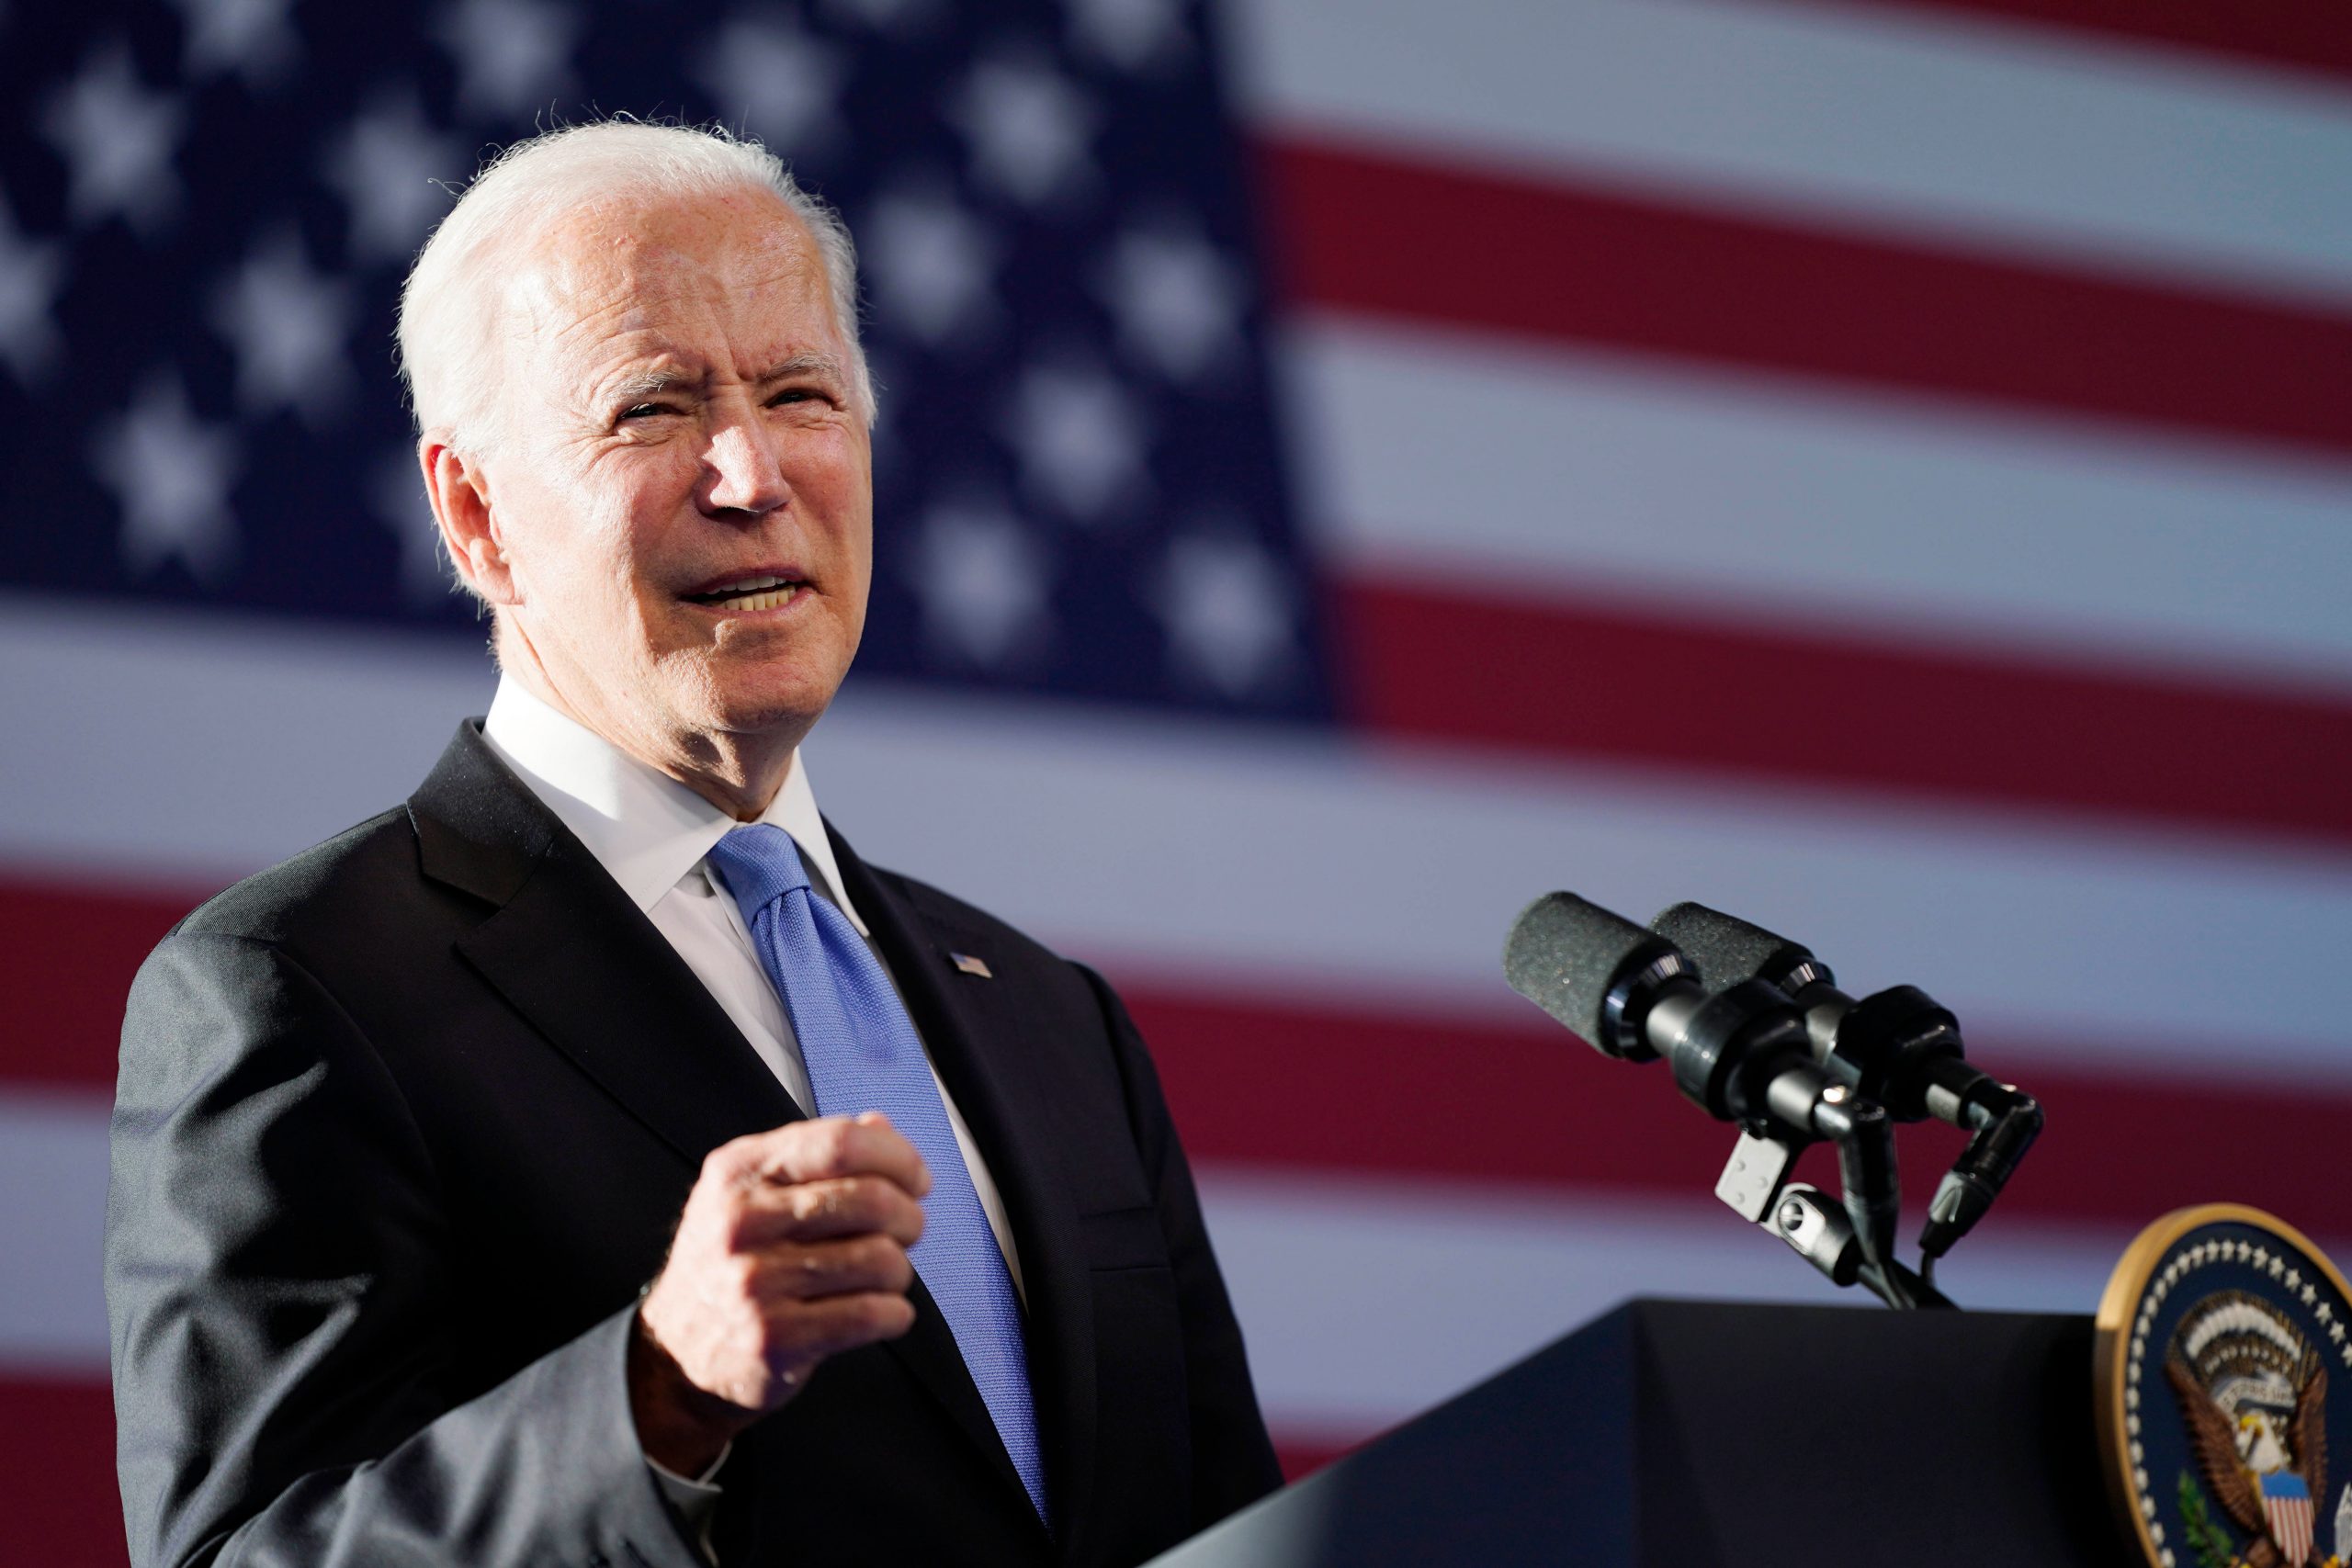 …youre in the wrong business: Biden snaps at reporter, then apologises